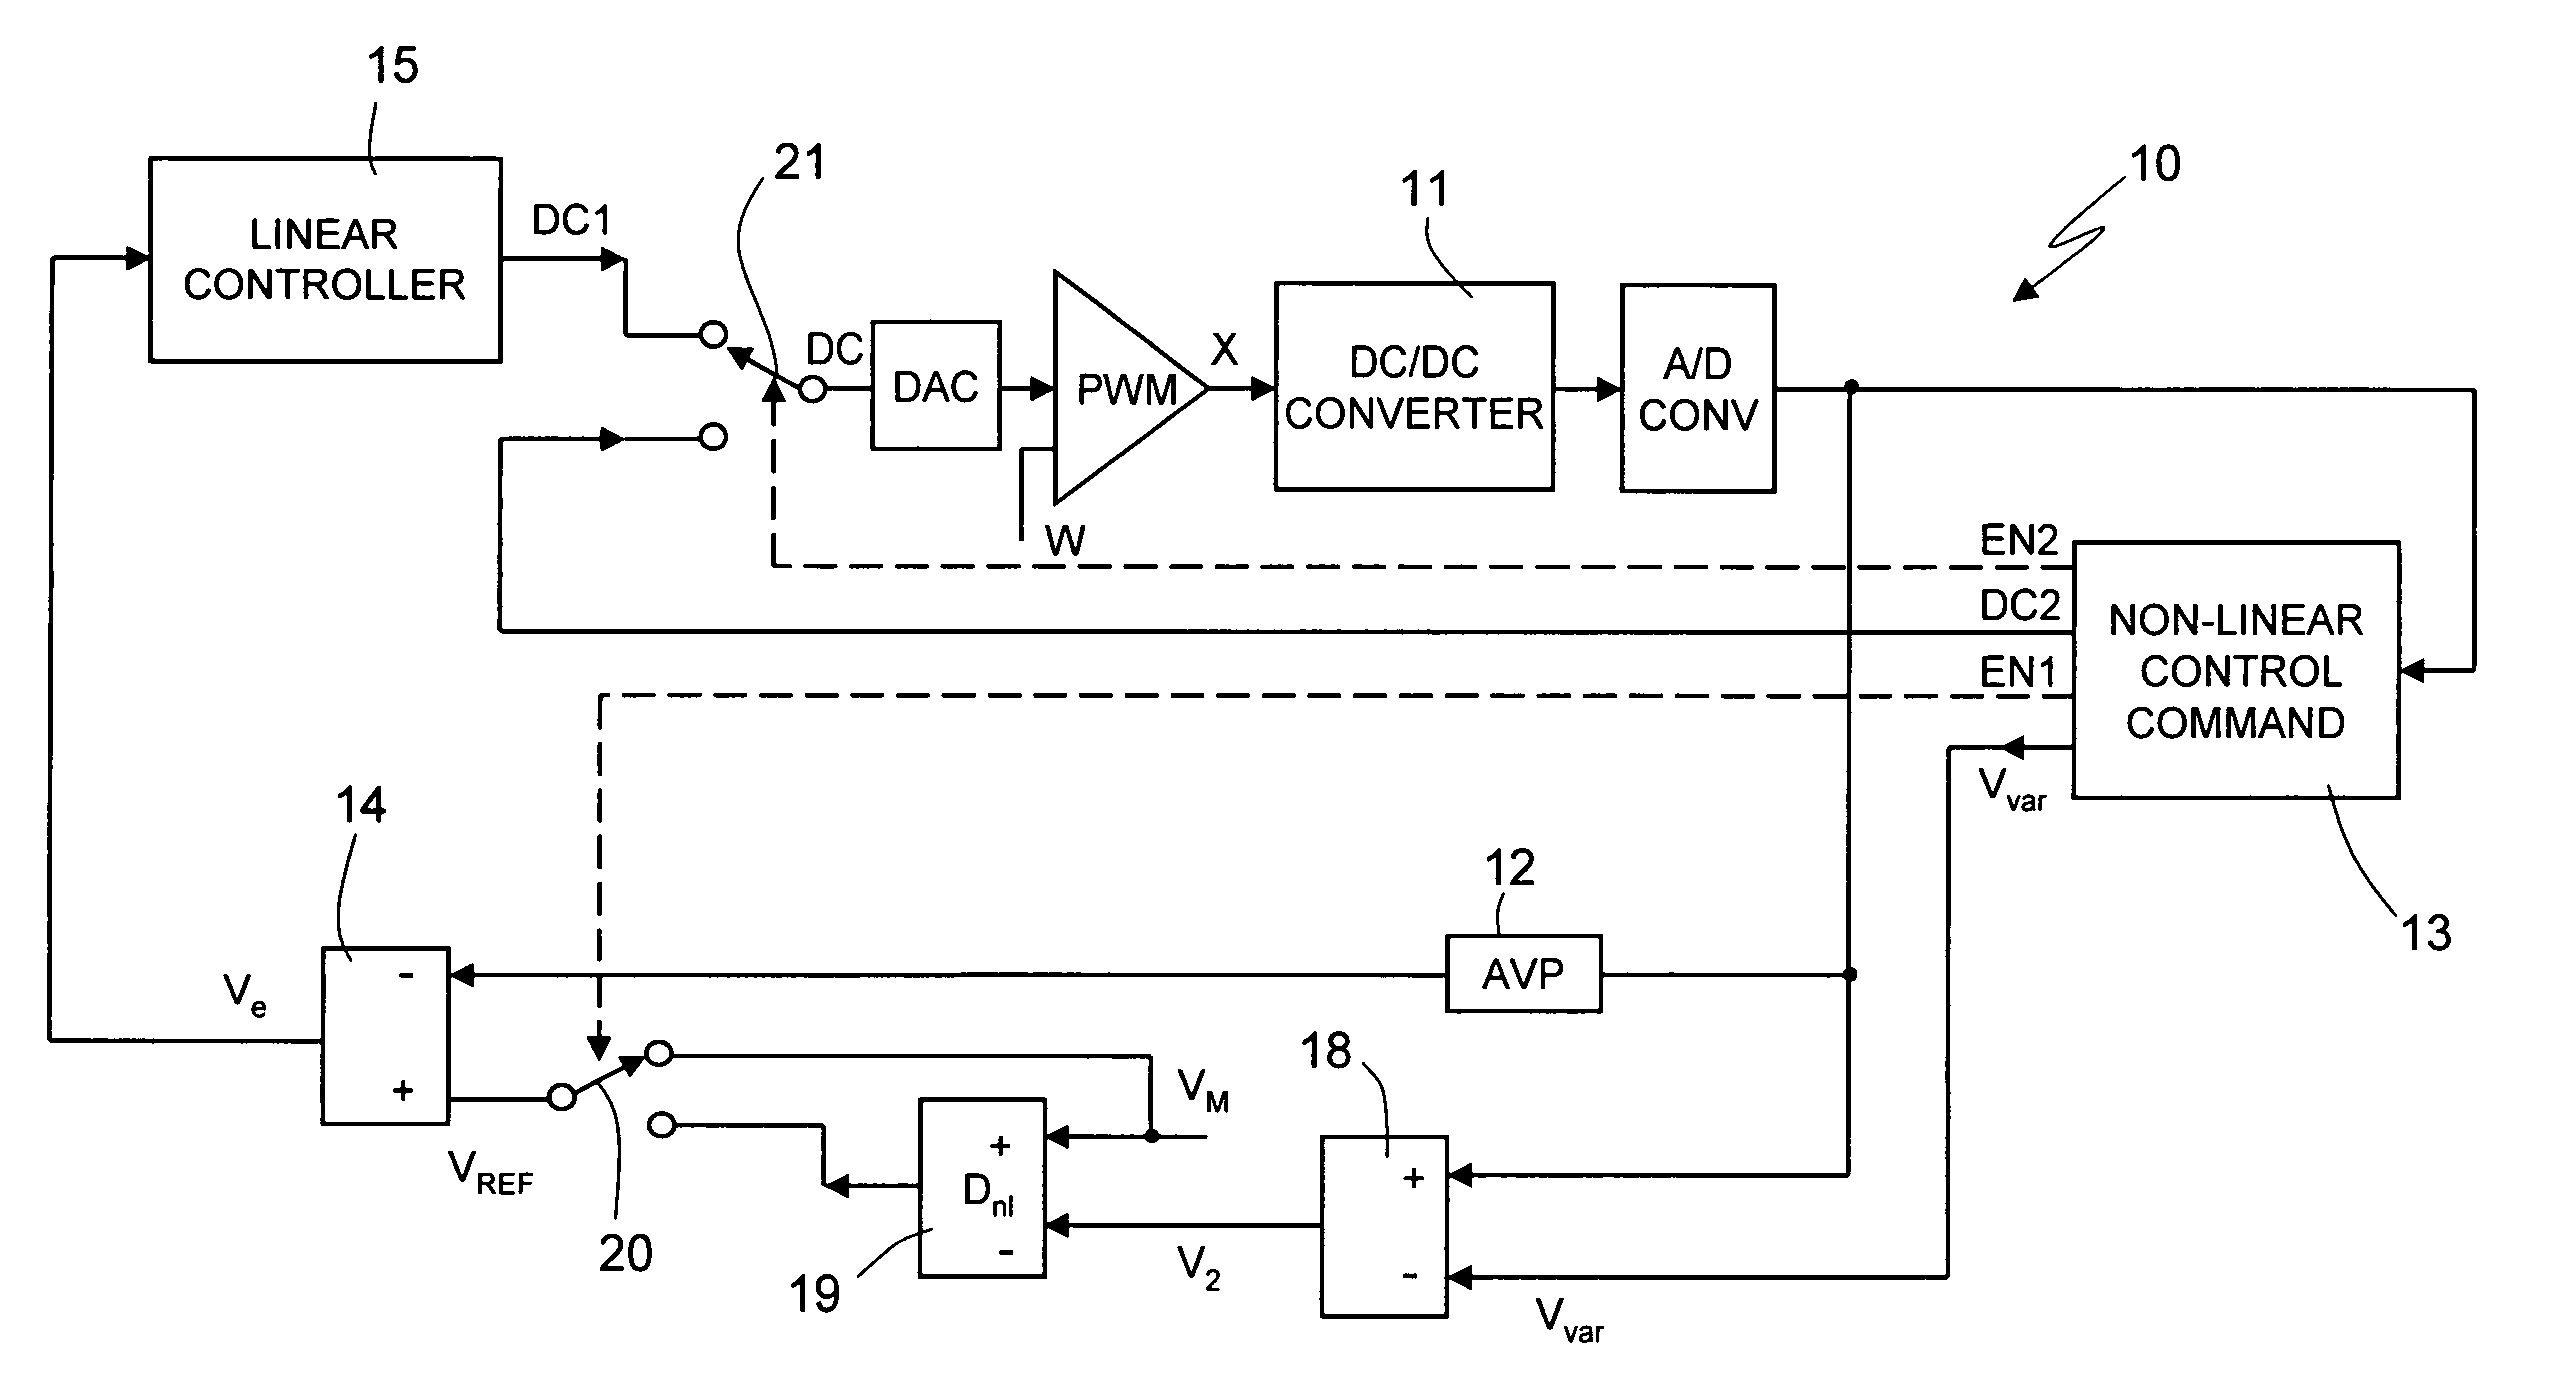 Nonlinear digital control circuit and method for a DC/DC converter